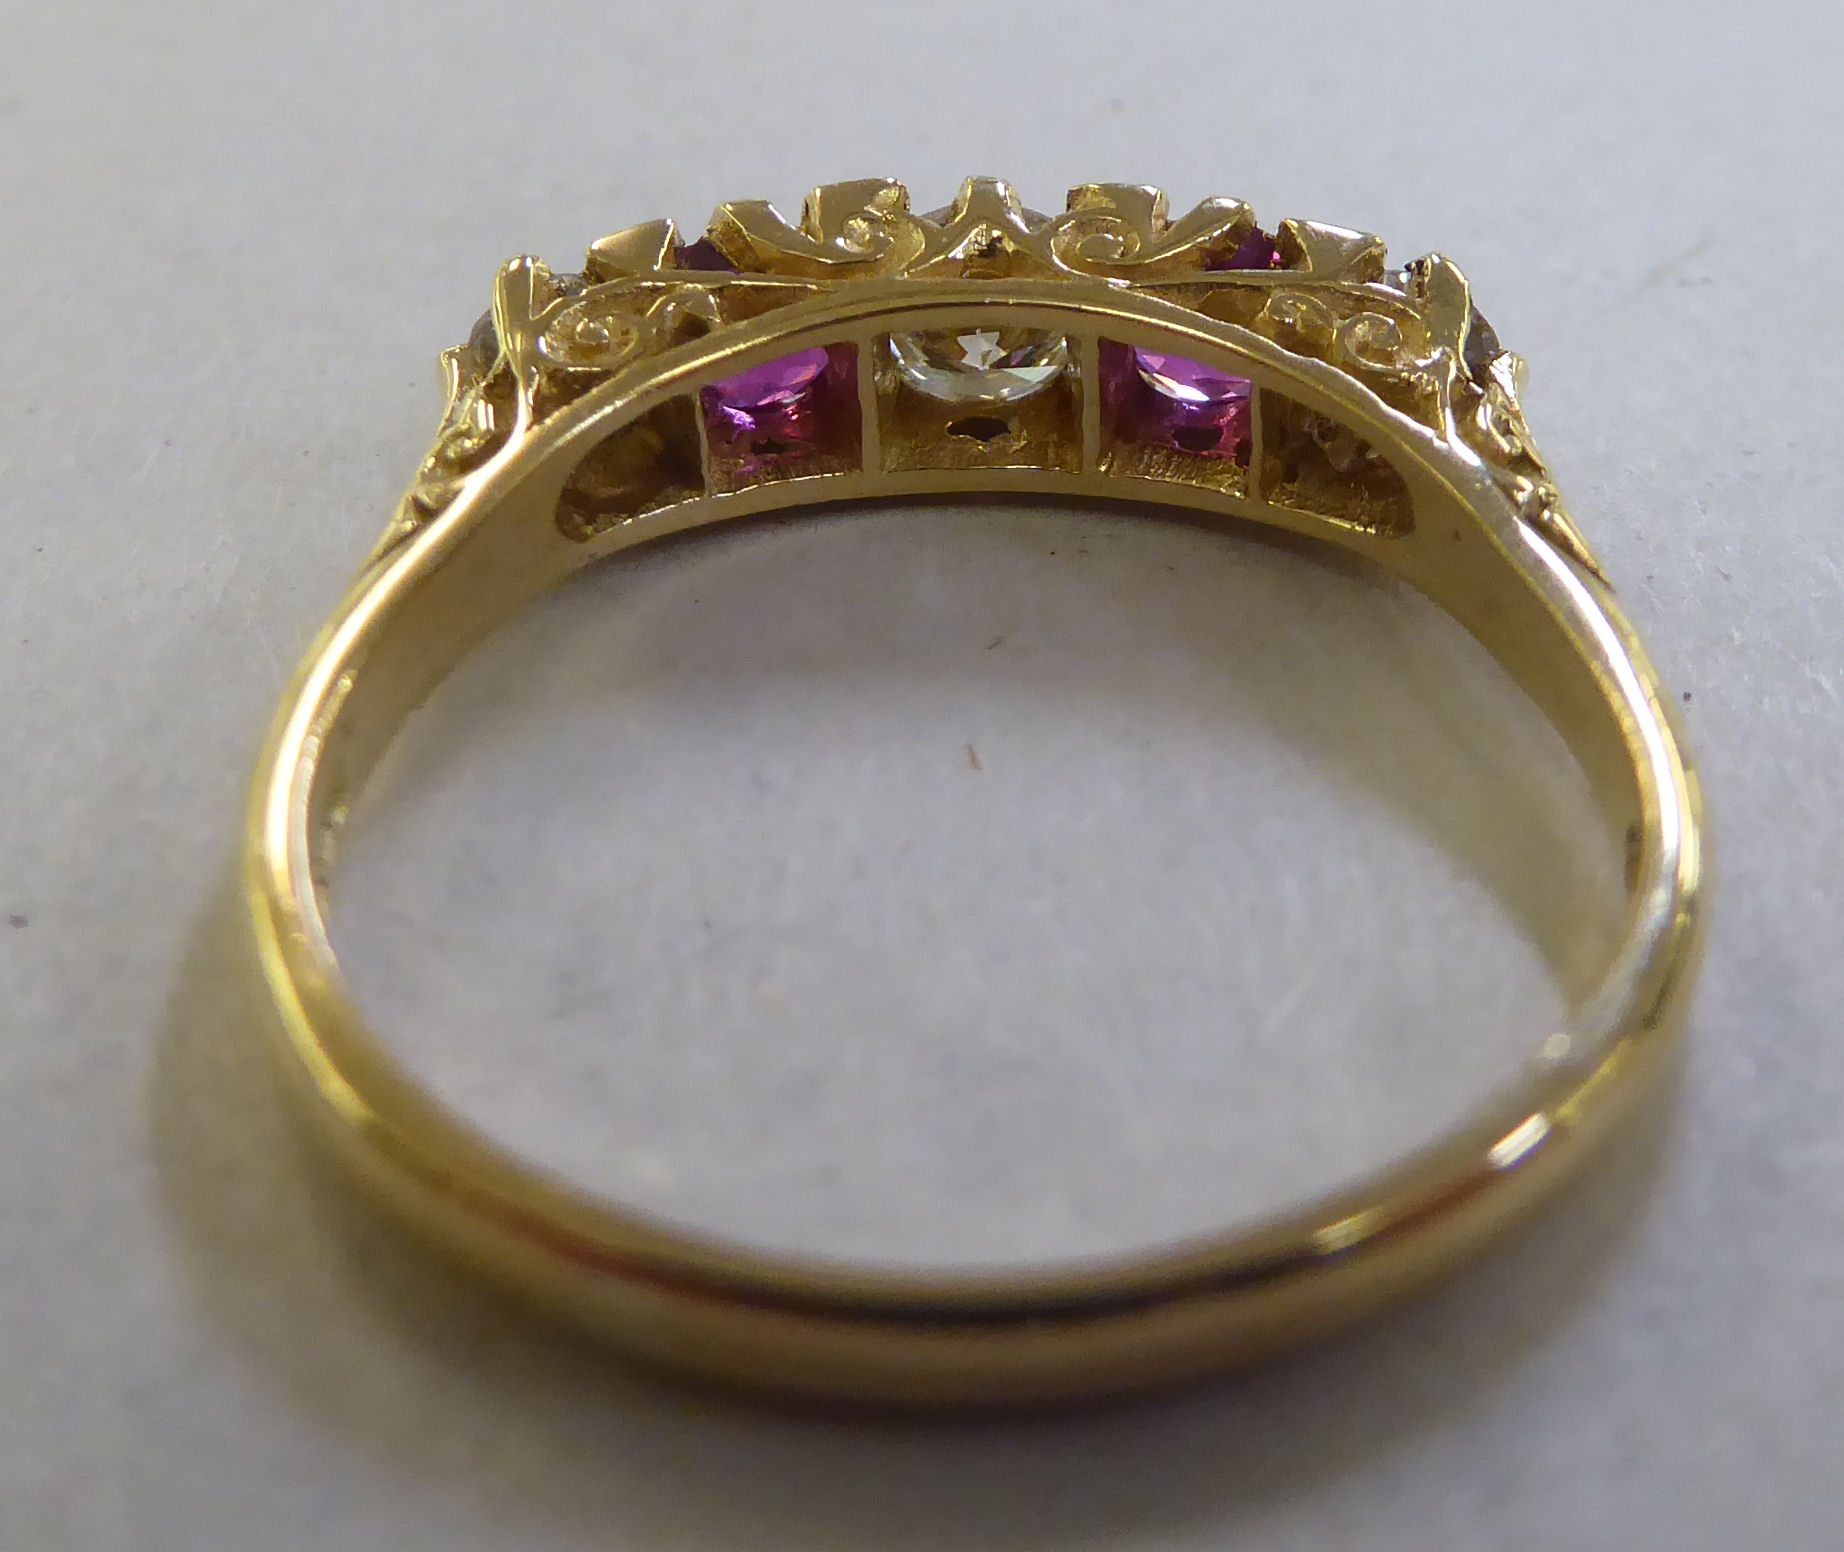 An 18ct gold diamond and ruby ring - Image 3 of 3